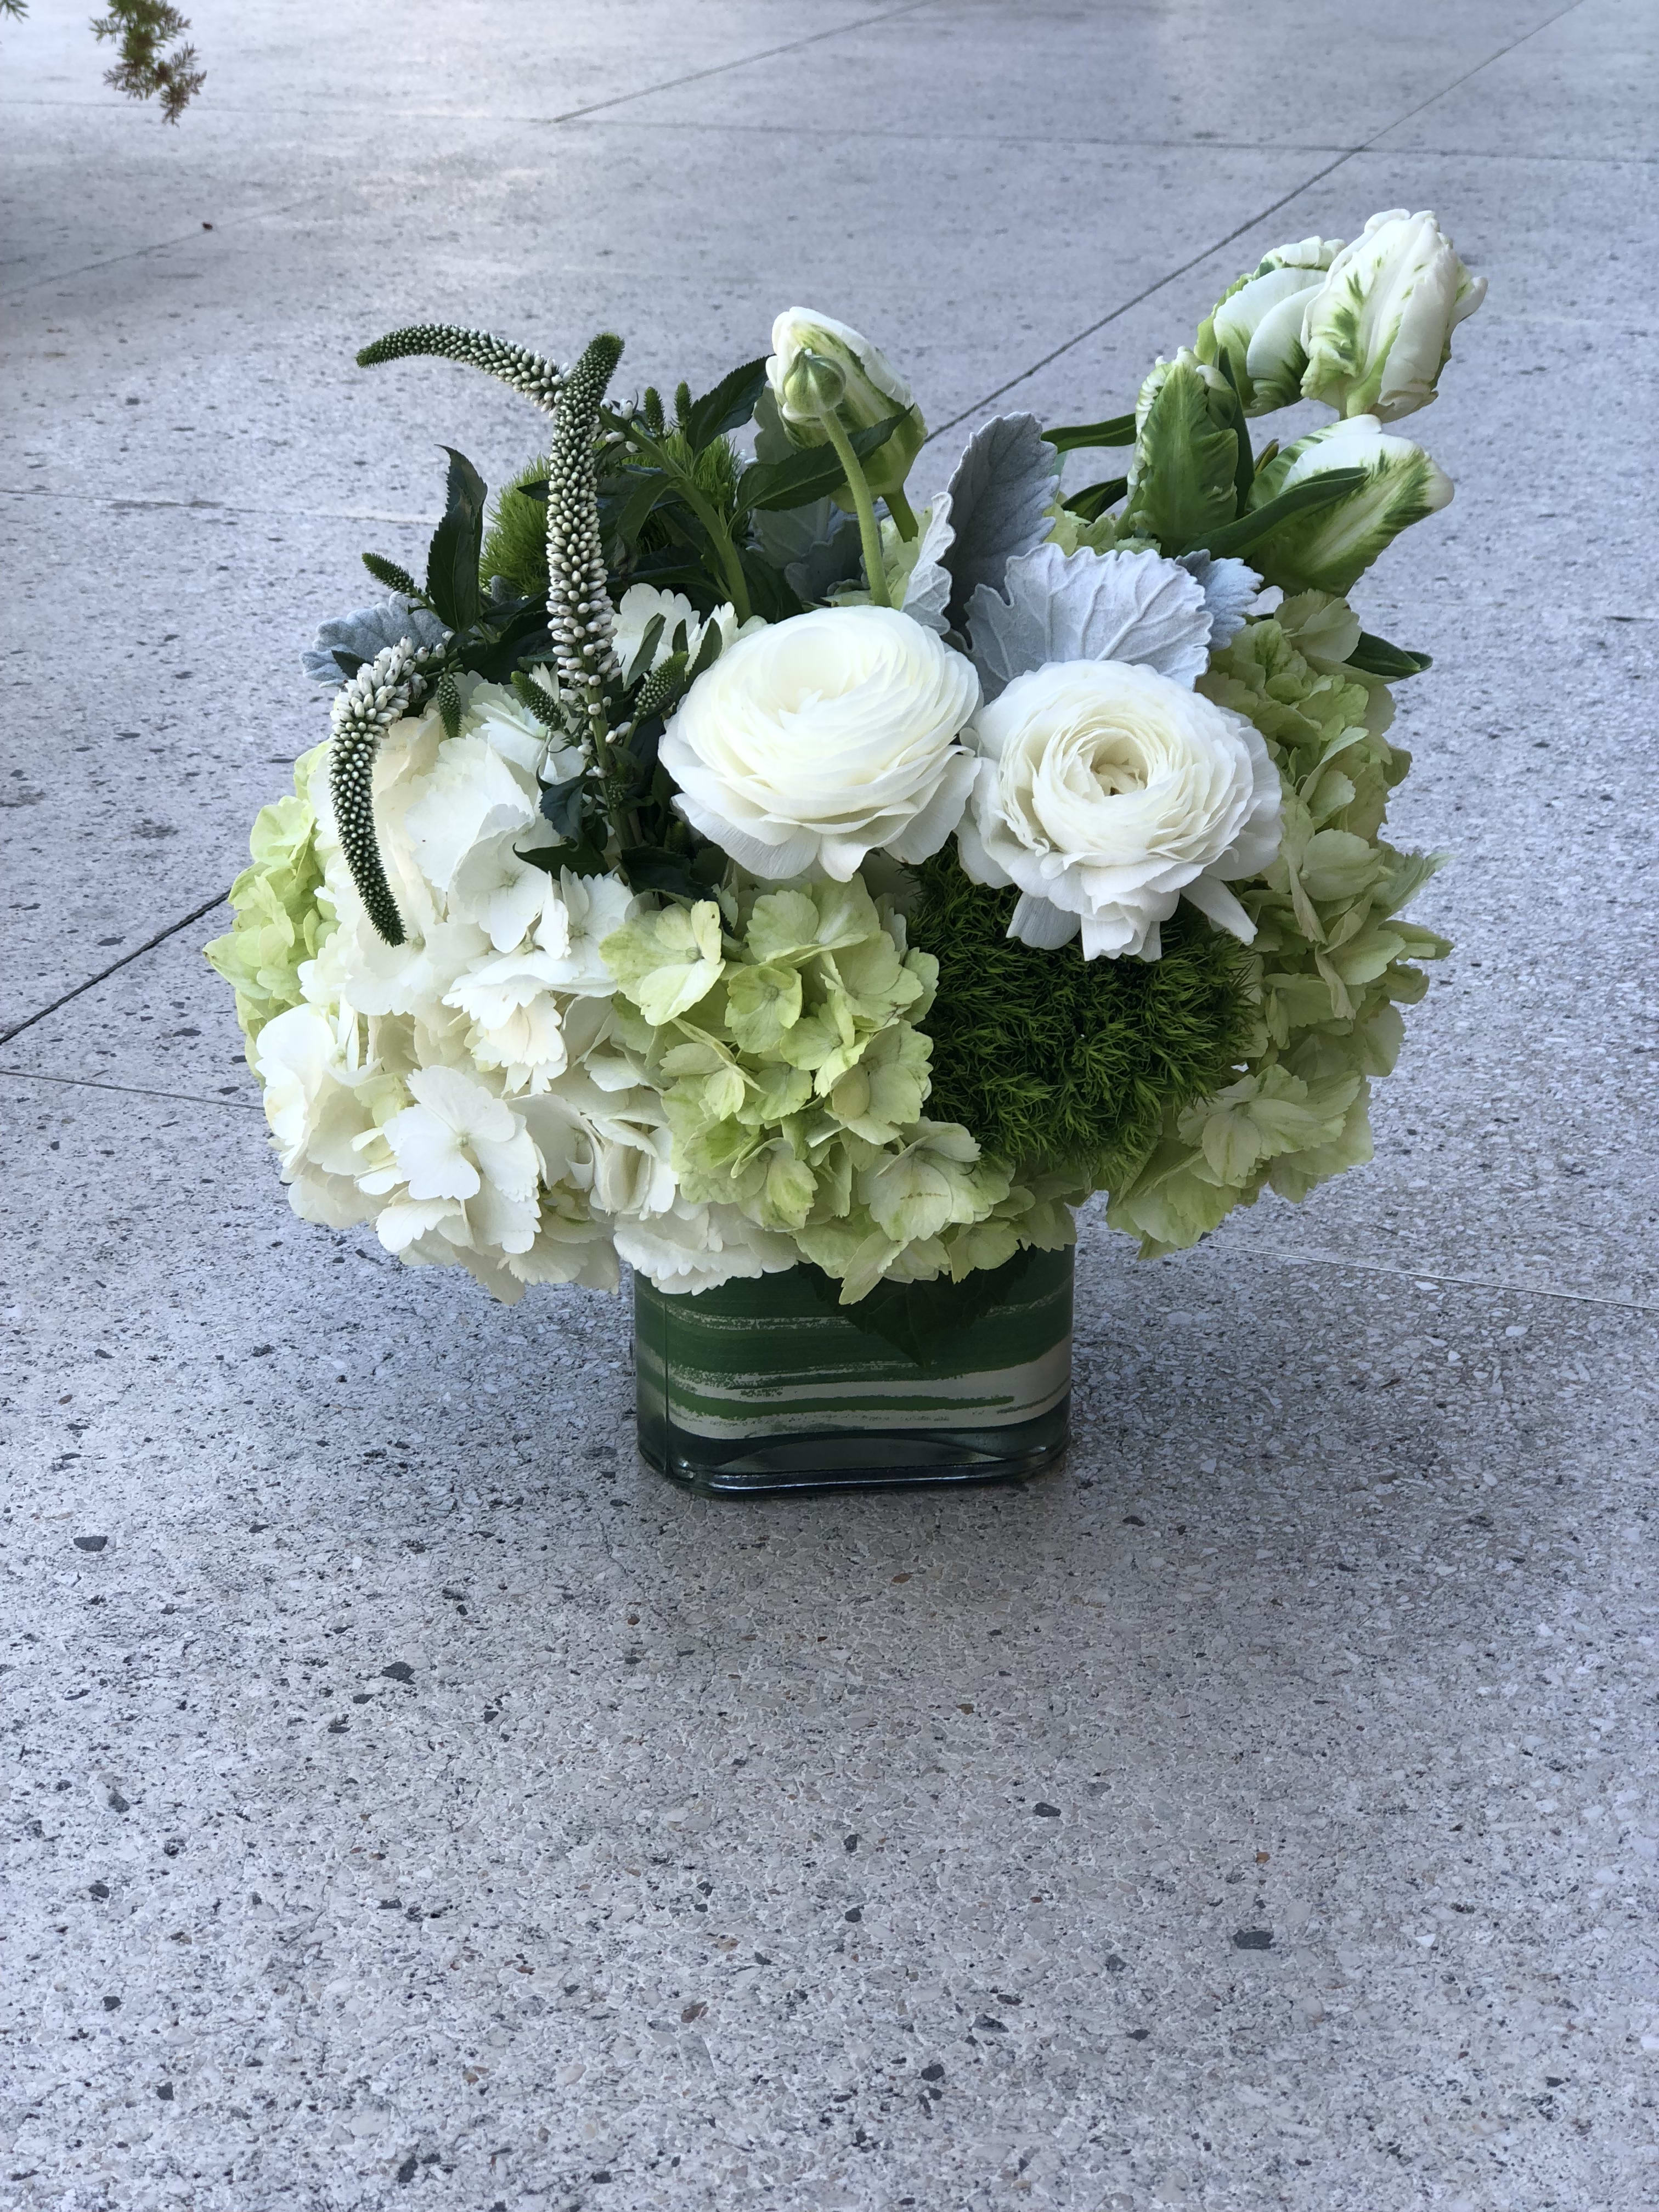 The Rio Bravo - Inspired by Bakersfield's neighborhood with some gorgeous views, this classy arrangement is filled with hydrangeas, tulips, ranunculus, dianthus, veronica and dusty miller and is perfect for any occasion.